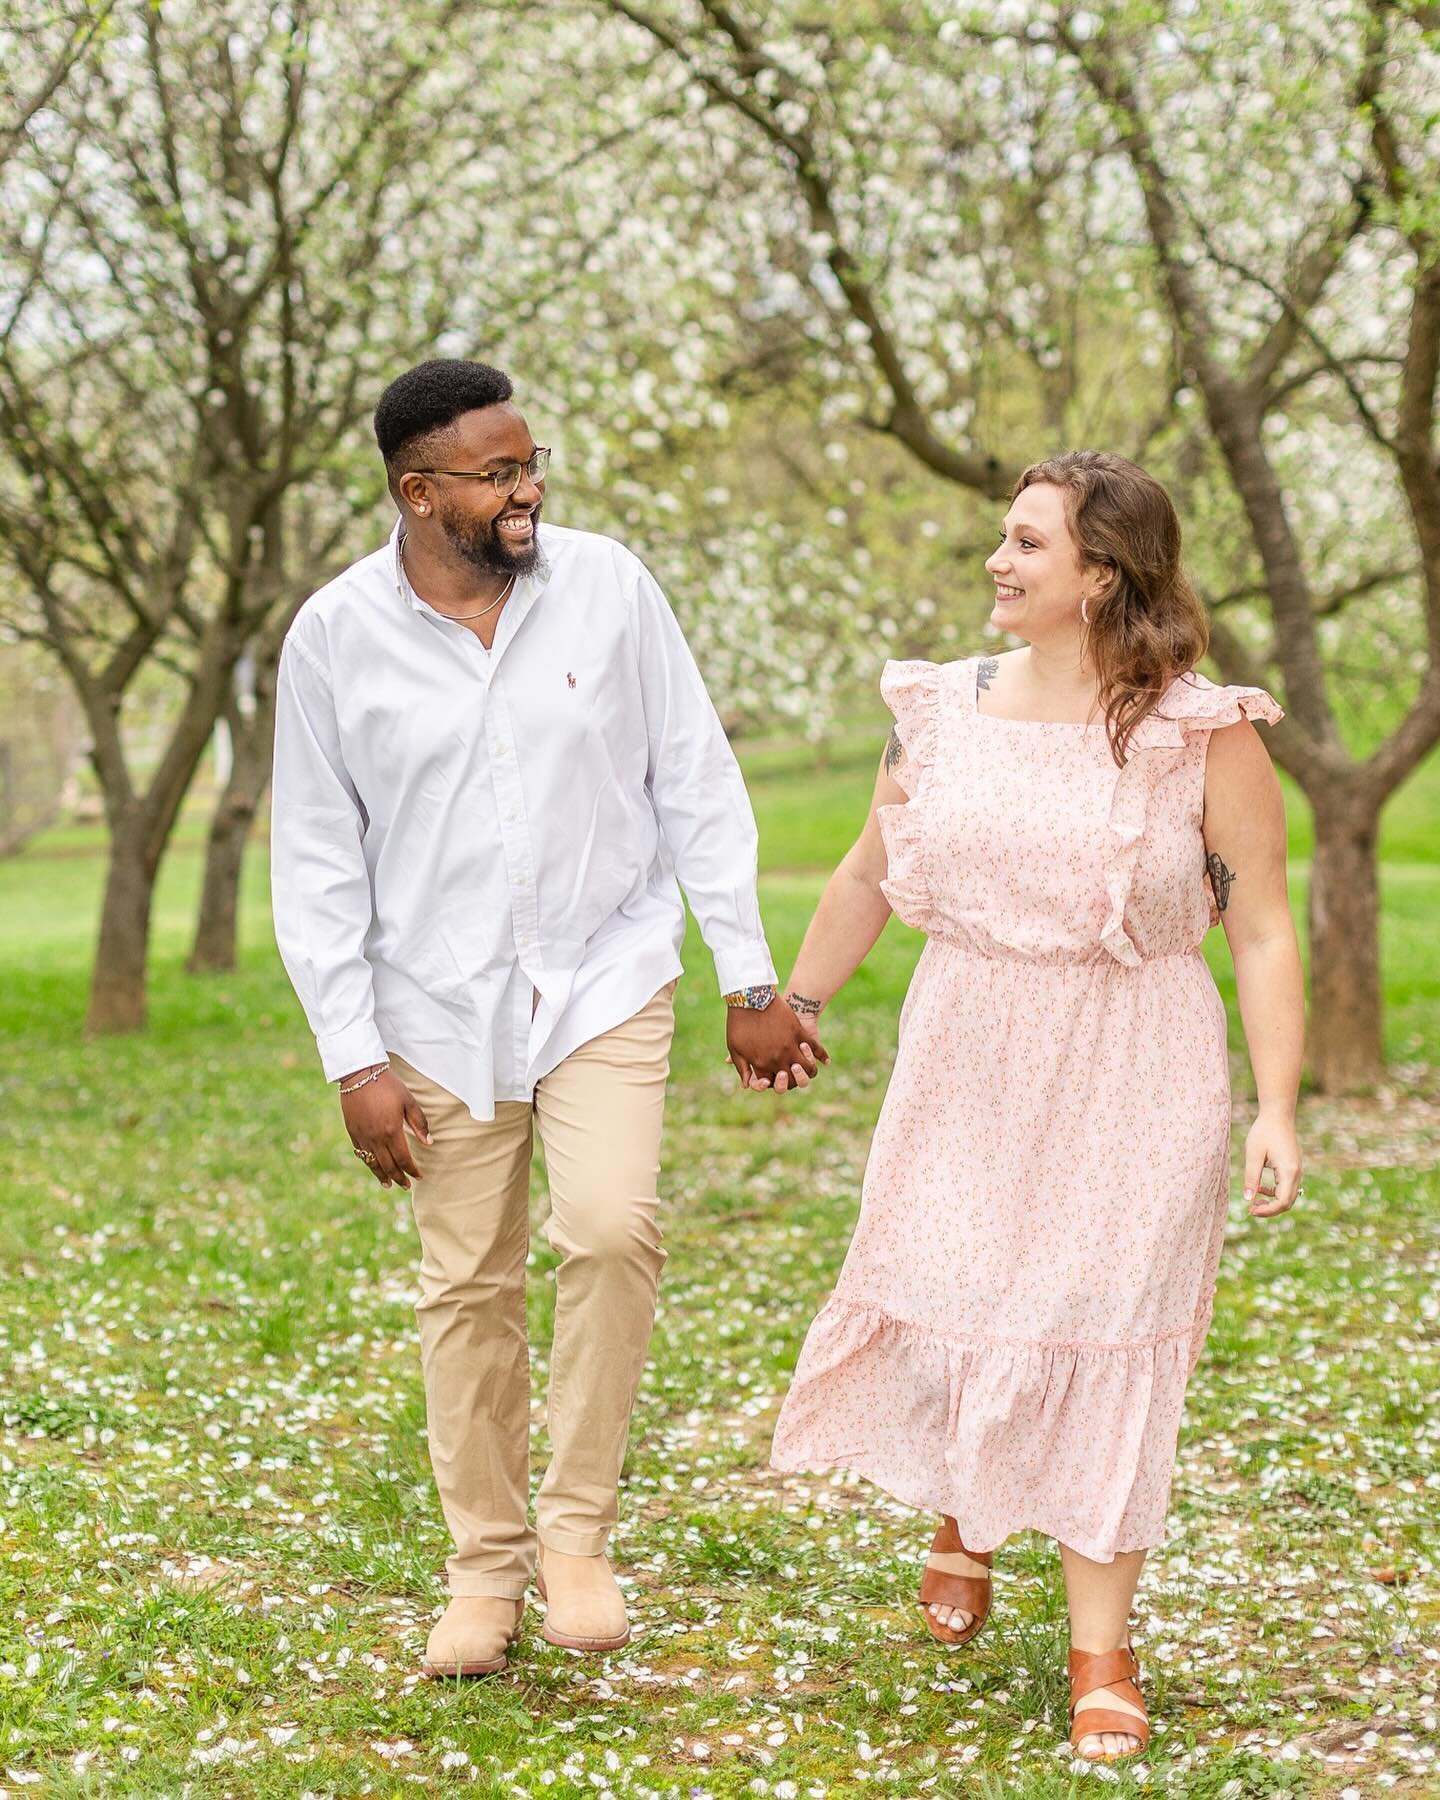 Another Spring engagement session in the books! Kenzie &amp; Will are engaged!! 💍

#engaged #engagementphotos #springengagement #howardcountyphotographer #carrollcountyphotographer #lifestylephotography #marylandweddingphotographer #ellicottcityphot